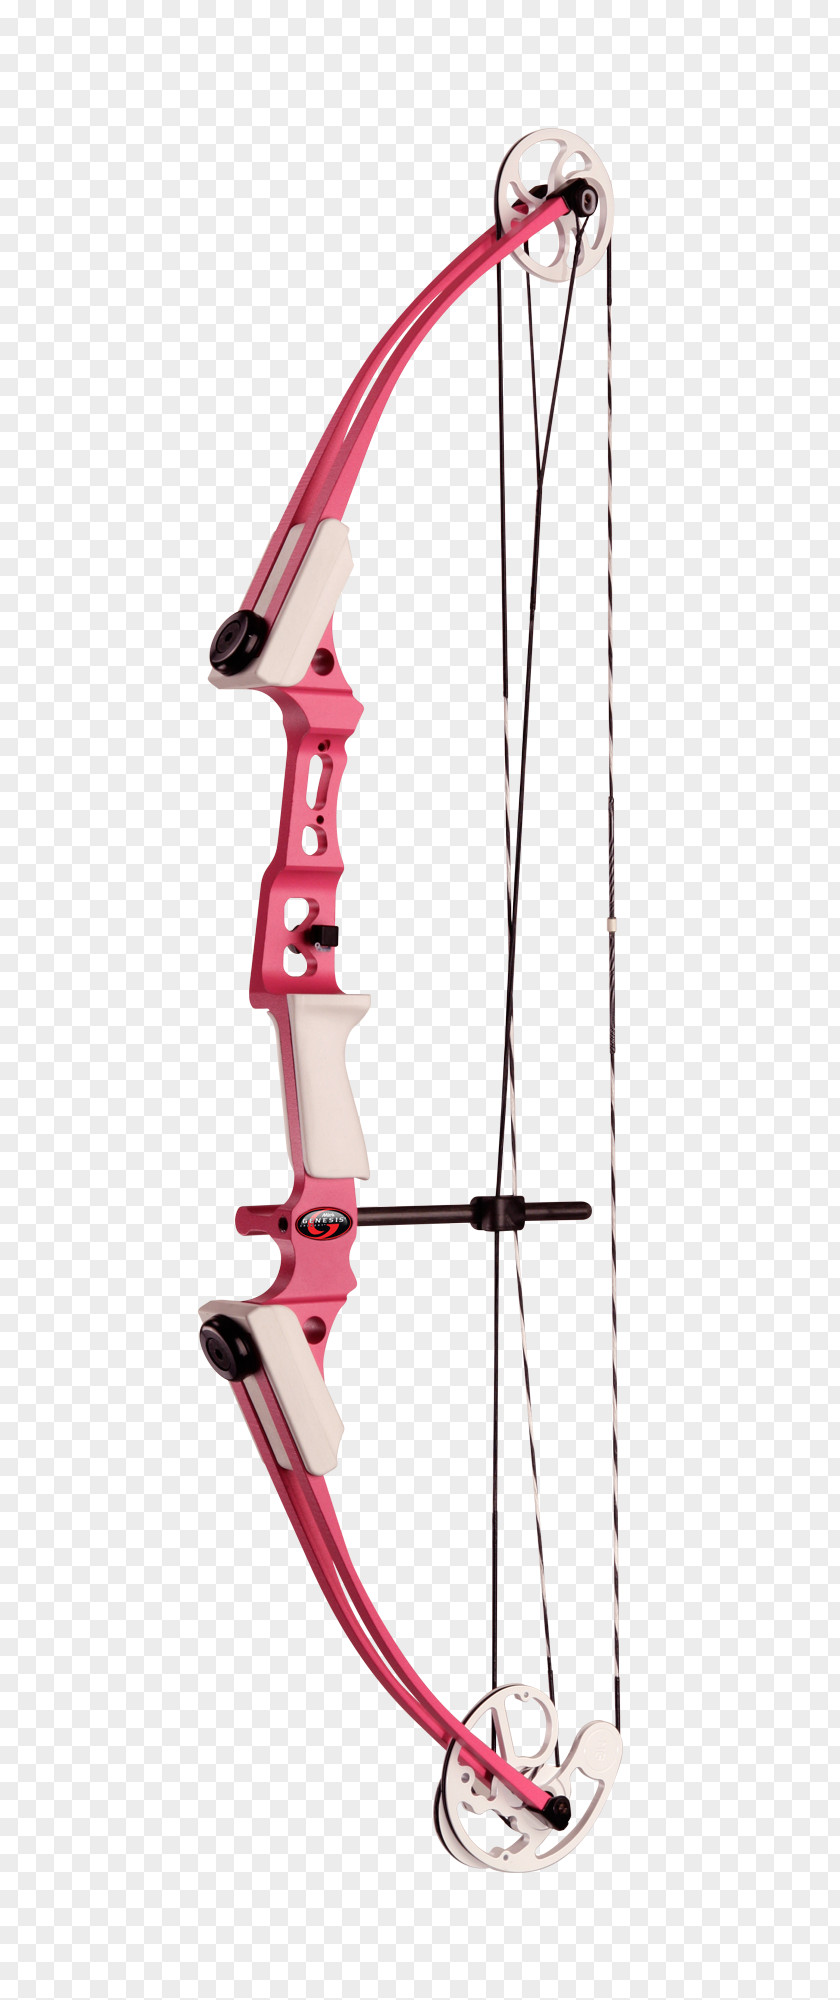 Arrow Compound Bows Bow And Archery Hunting PNG